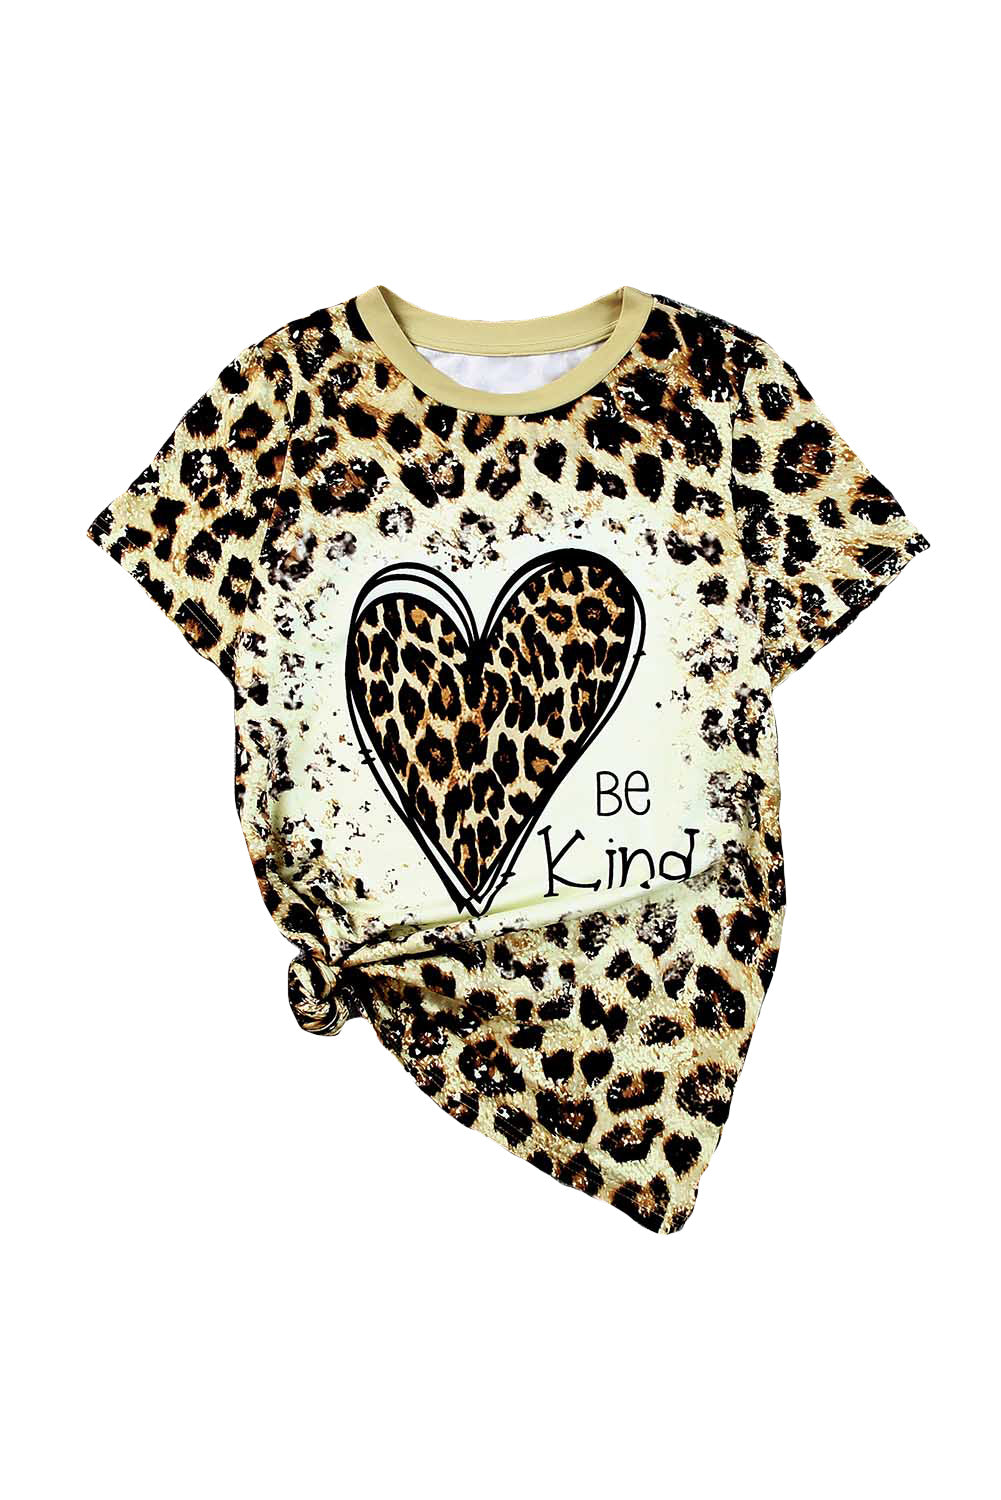 LC25219229-20-S, LC25219229-20-M, LC25219229-20-L, LC25219229-20-XL, Leopard Be Kind Heart Graphic Print T Shirt Heart Valentine Graphic Tee 